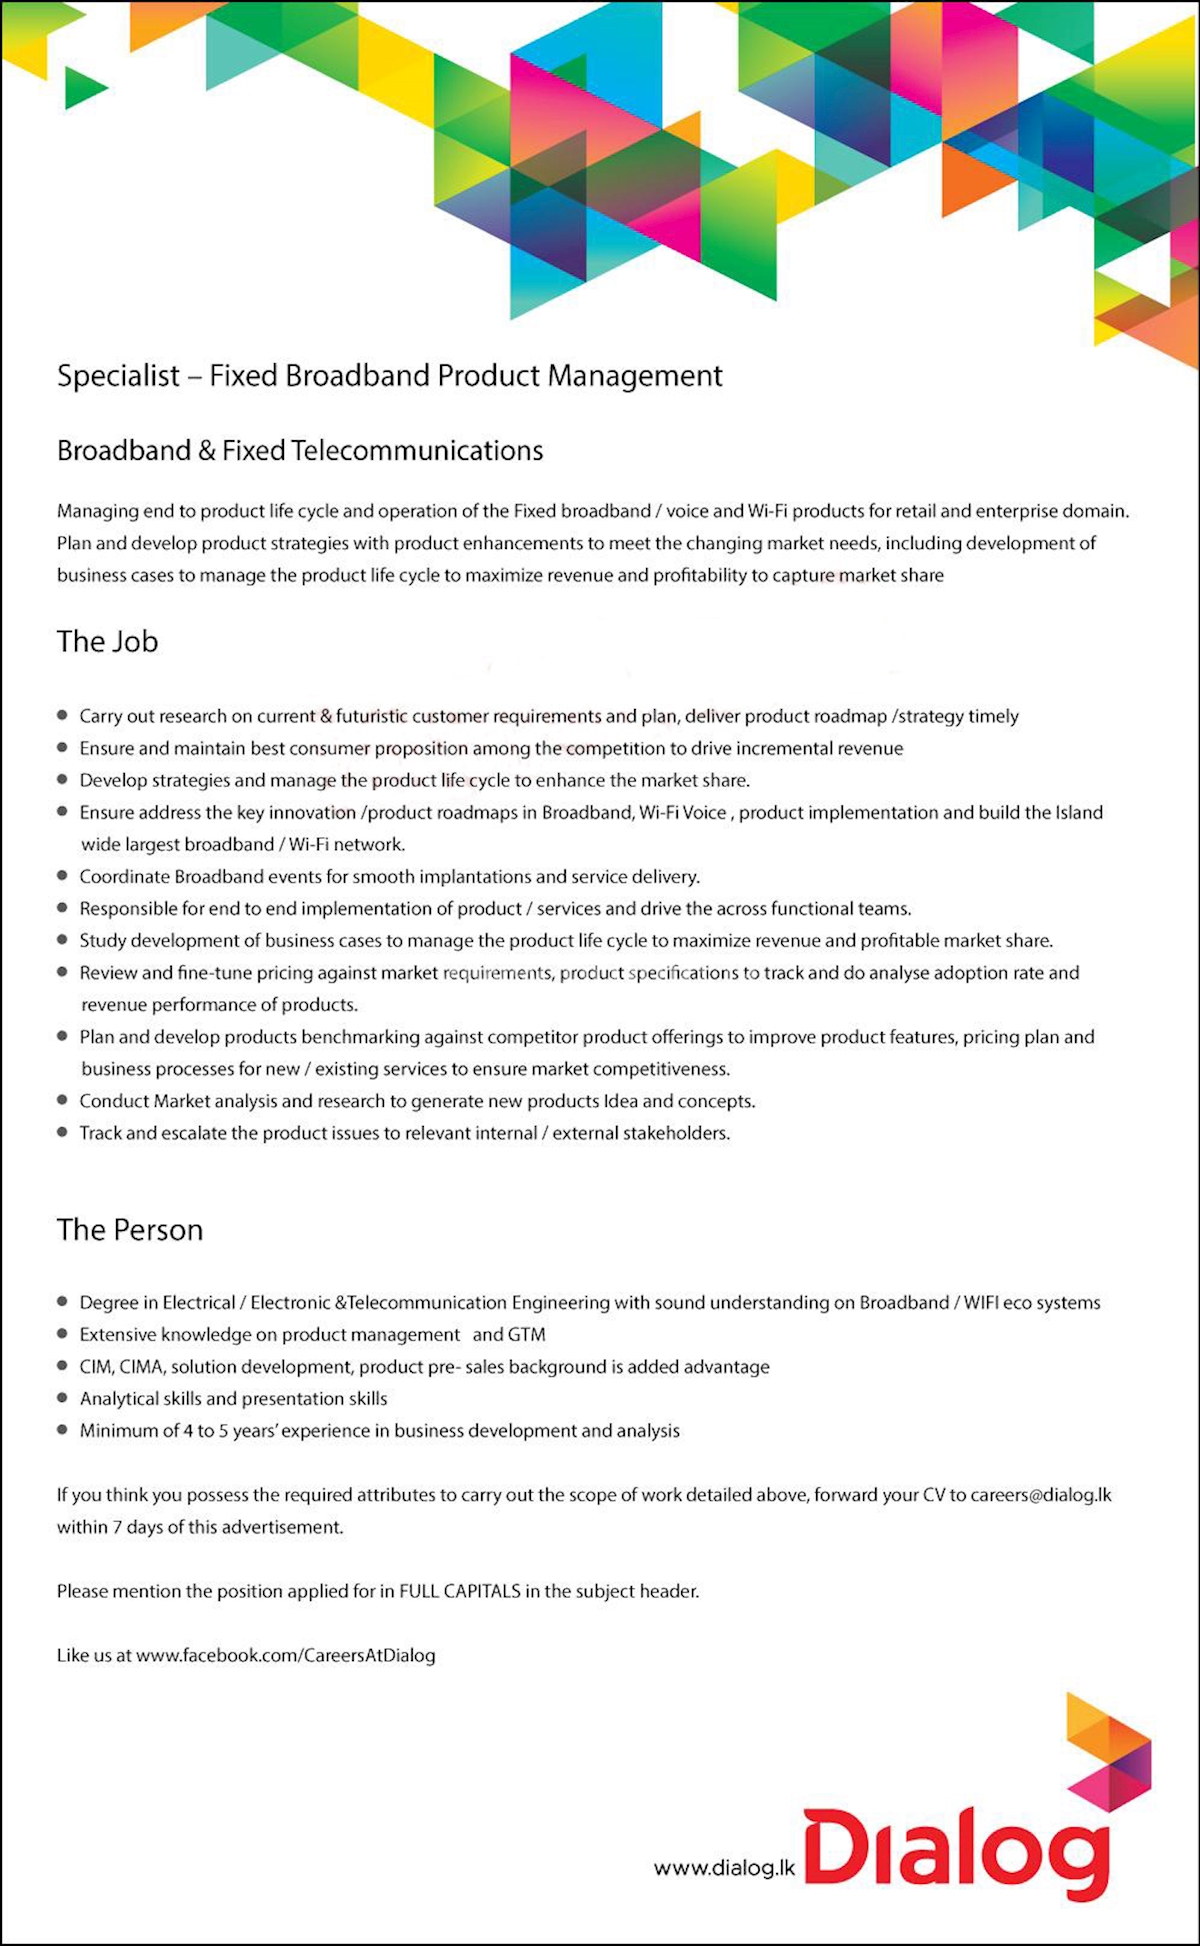 Specialist - Fixed Broadband Product Management